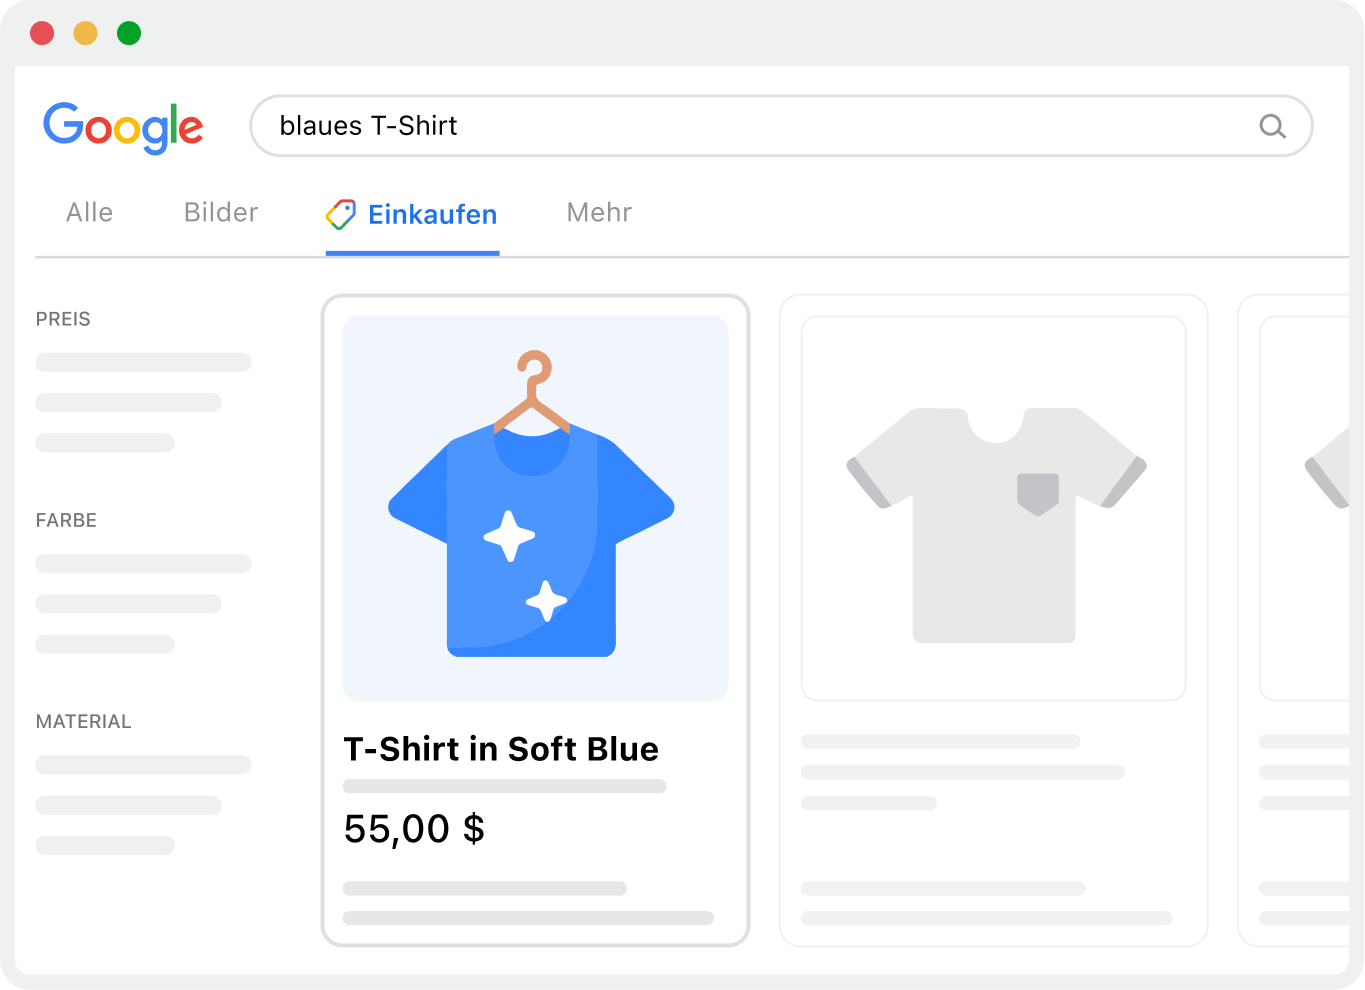 Illustrated Google product result for a blue t-shirt